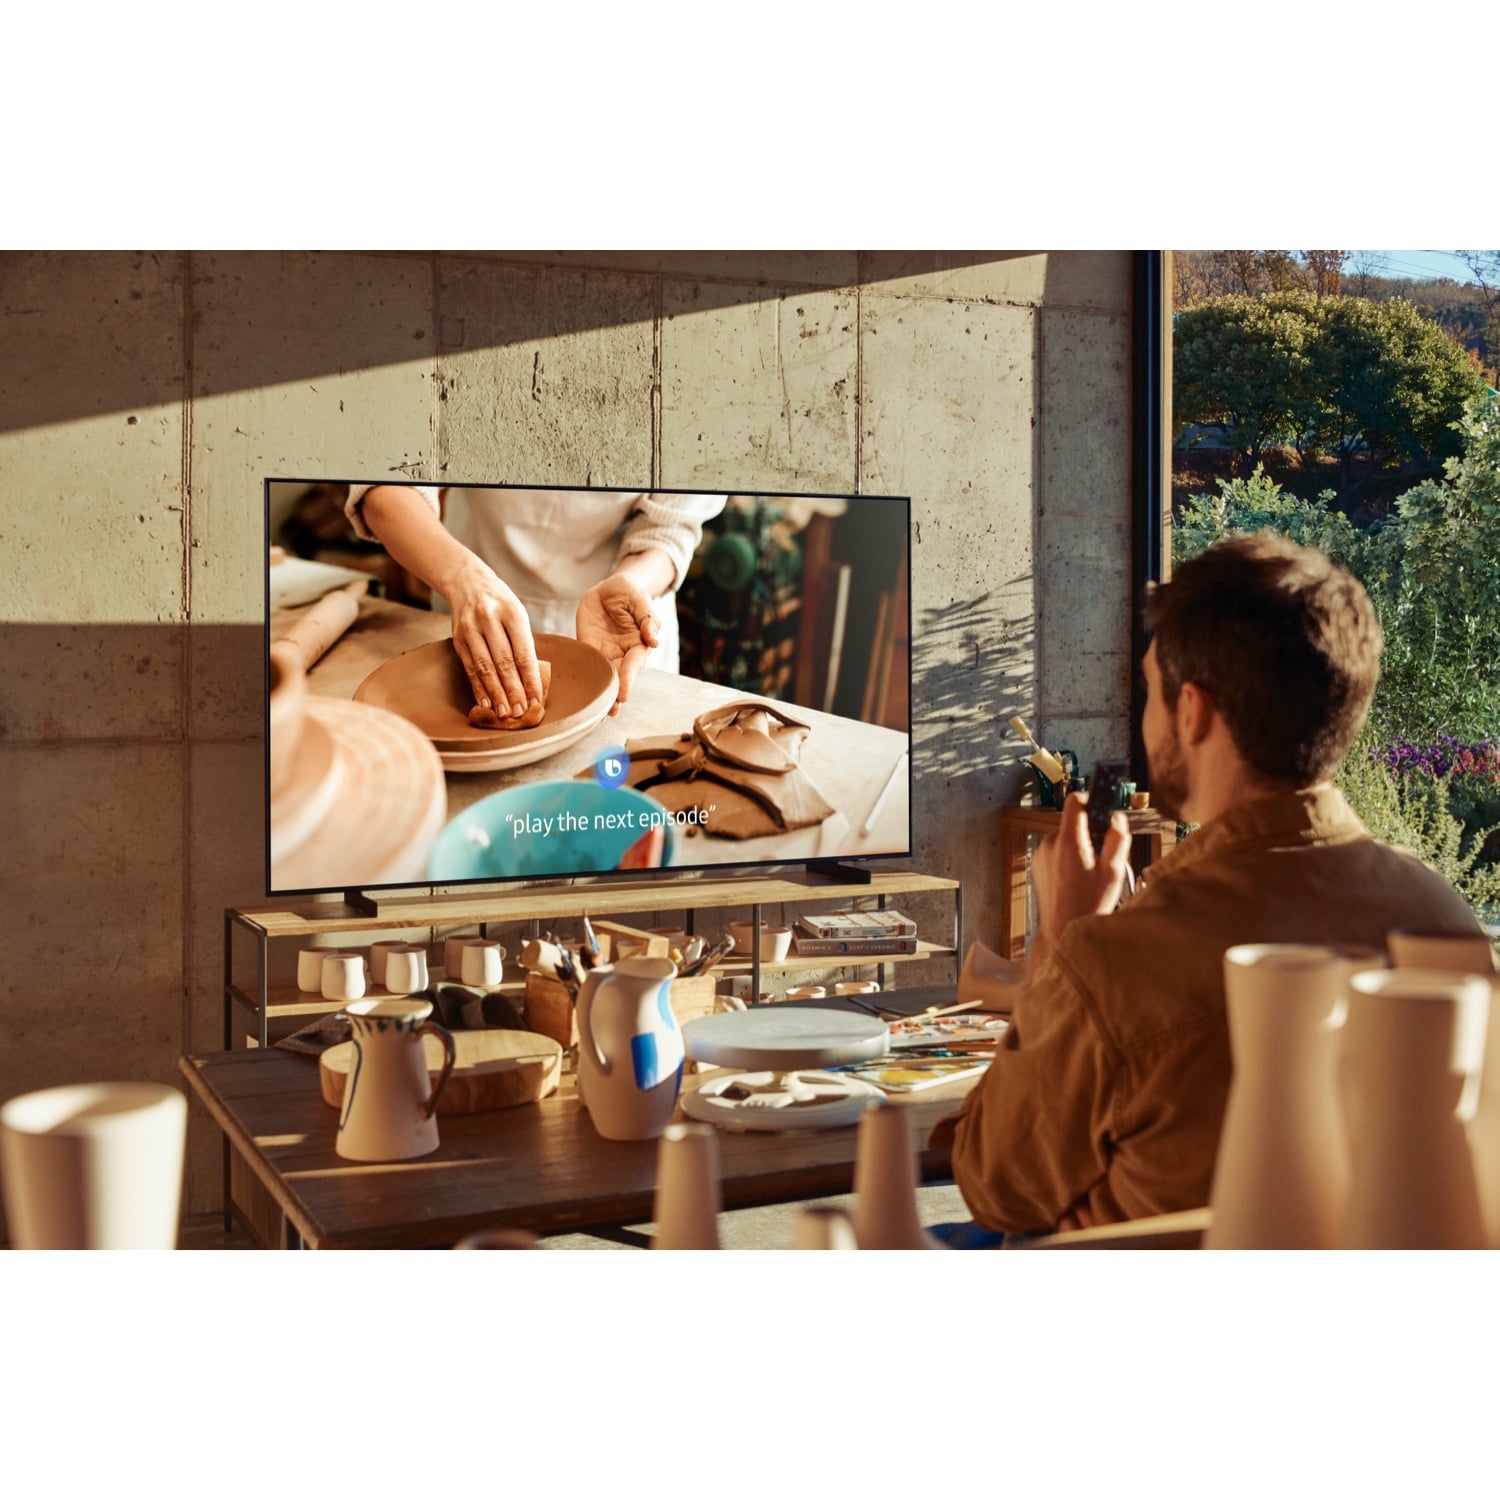 Samsung UE43AU8000KXXU 43" 4K UHD HDR Smart TV HDR powered by HDR10+ with Dynamic Crystal Colour and Air Slim Design - 4